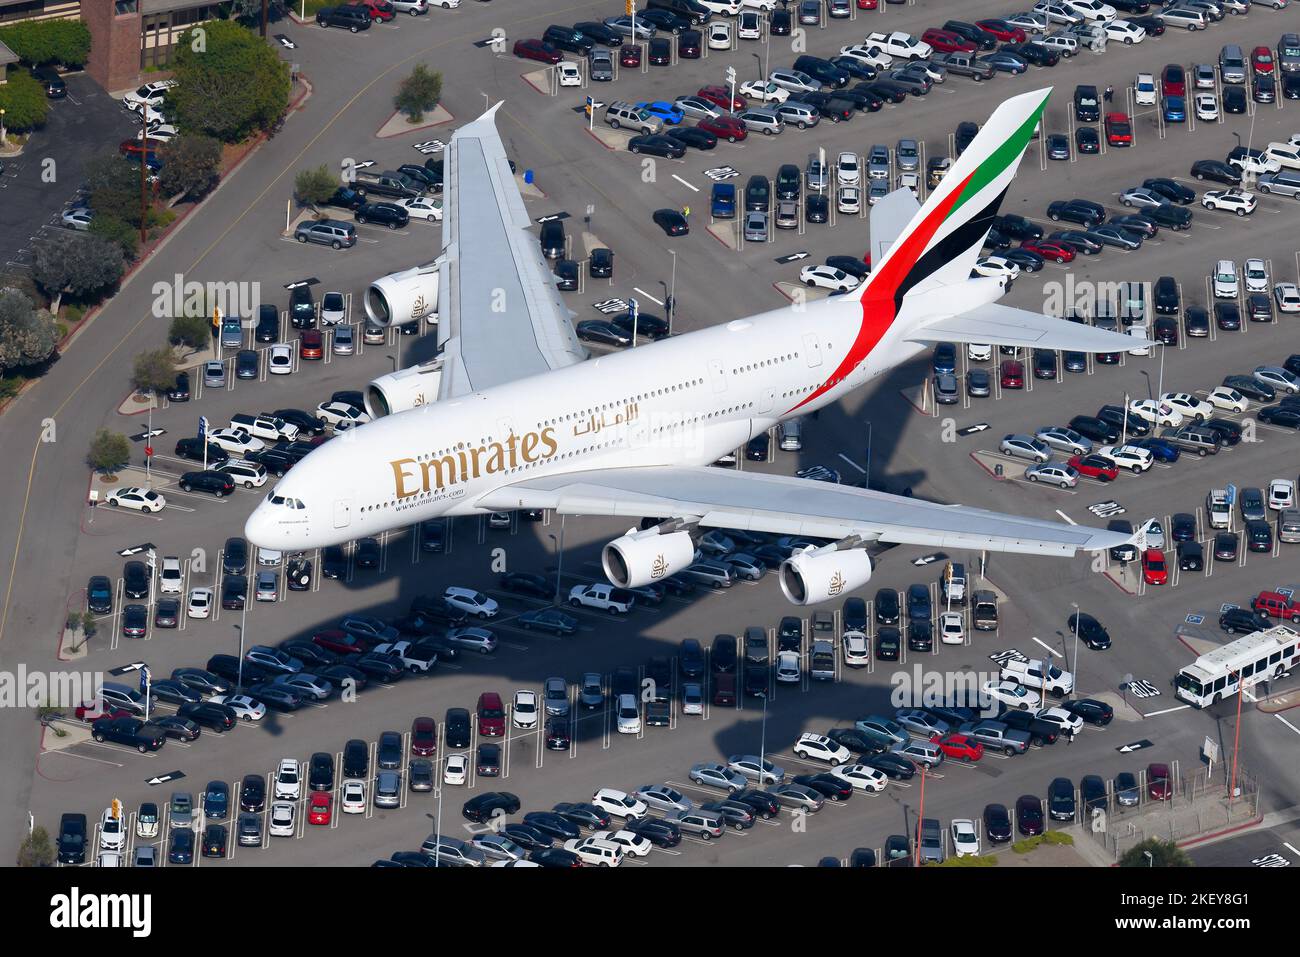 Emirates Airline Airbus A380 aircraft landing. Aerial view of Emirates Airlines A380-800 airplane. Stock Photo